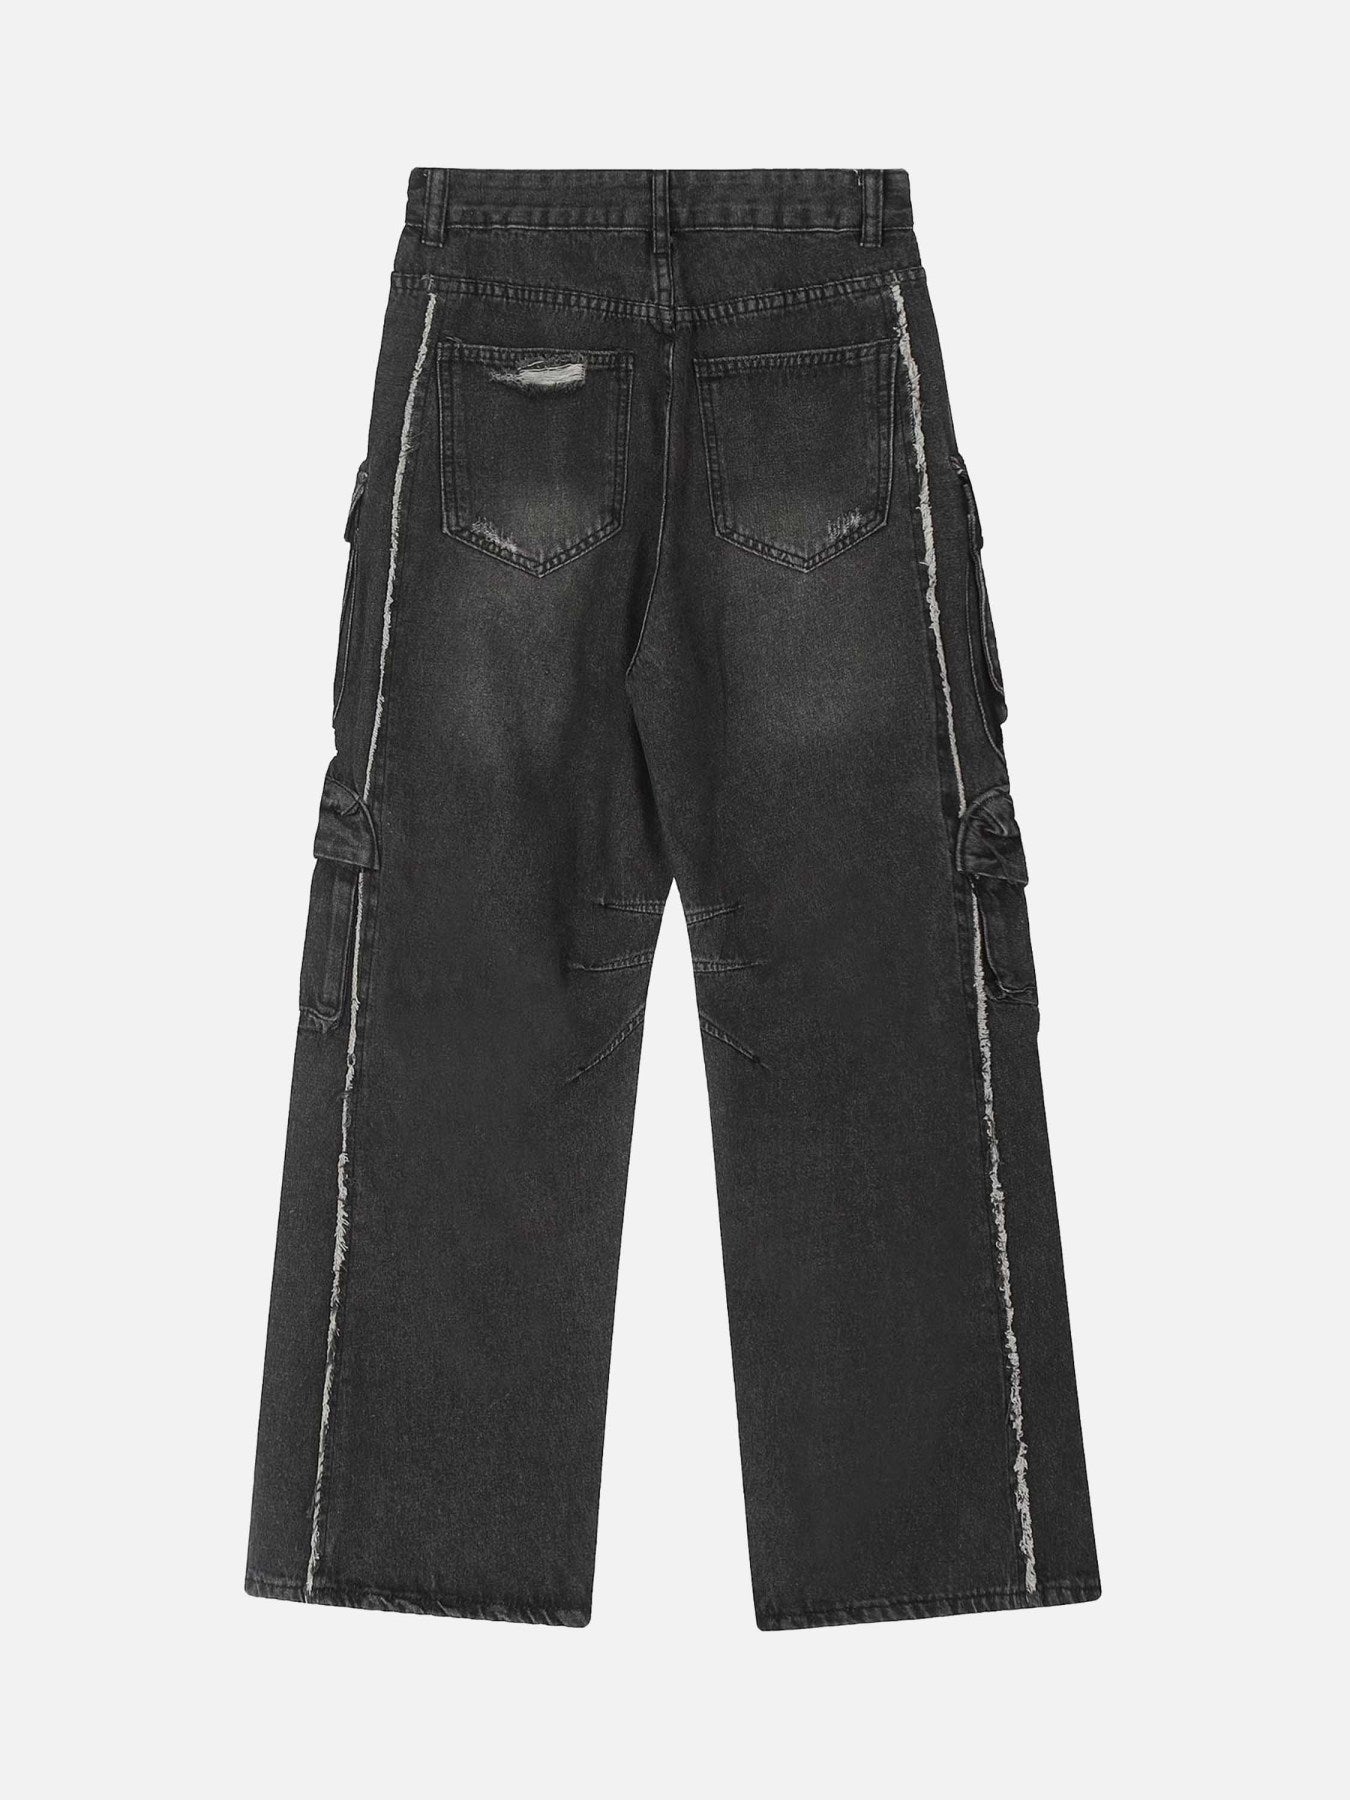 Thesupermade Washed Multi-pocket Work Cargo Jeans - 1830